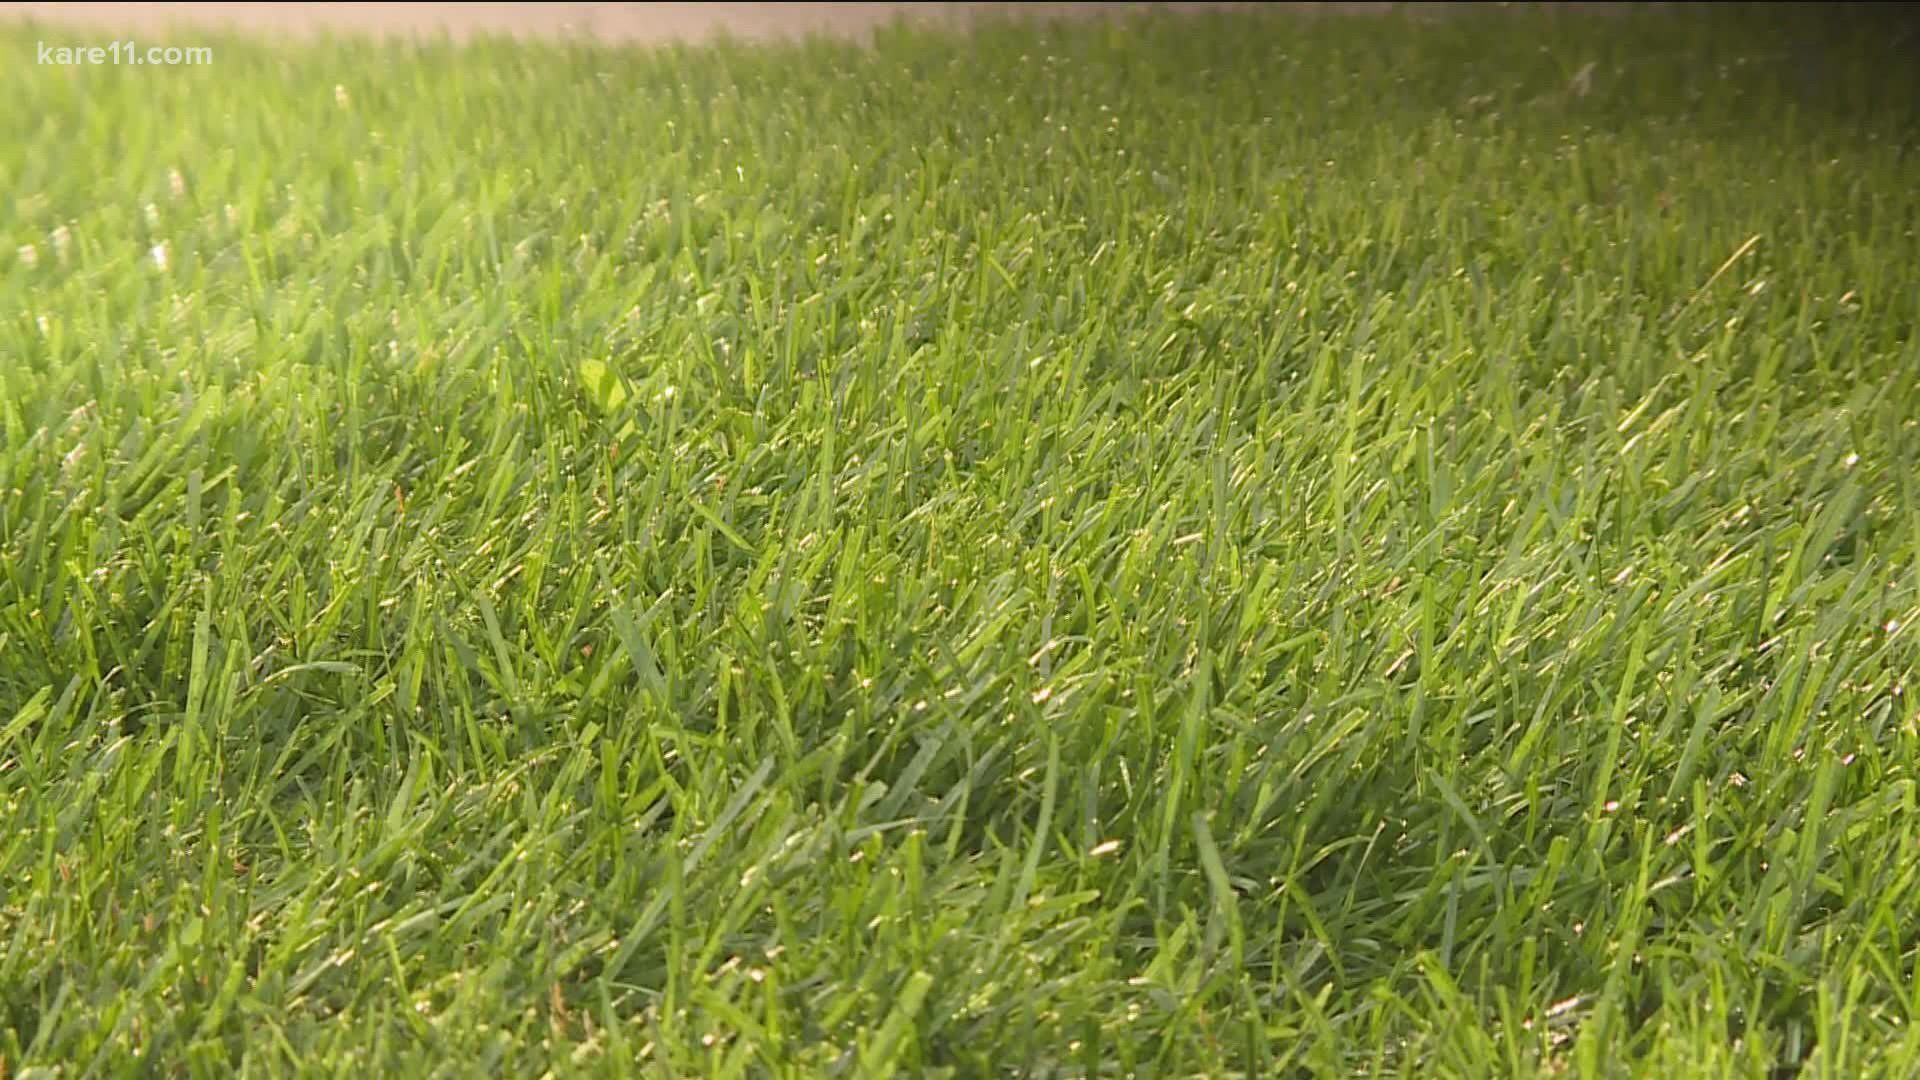 While recent rains have helped some, there are a few things you can and should still do for a lush lawn next year.